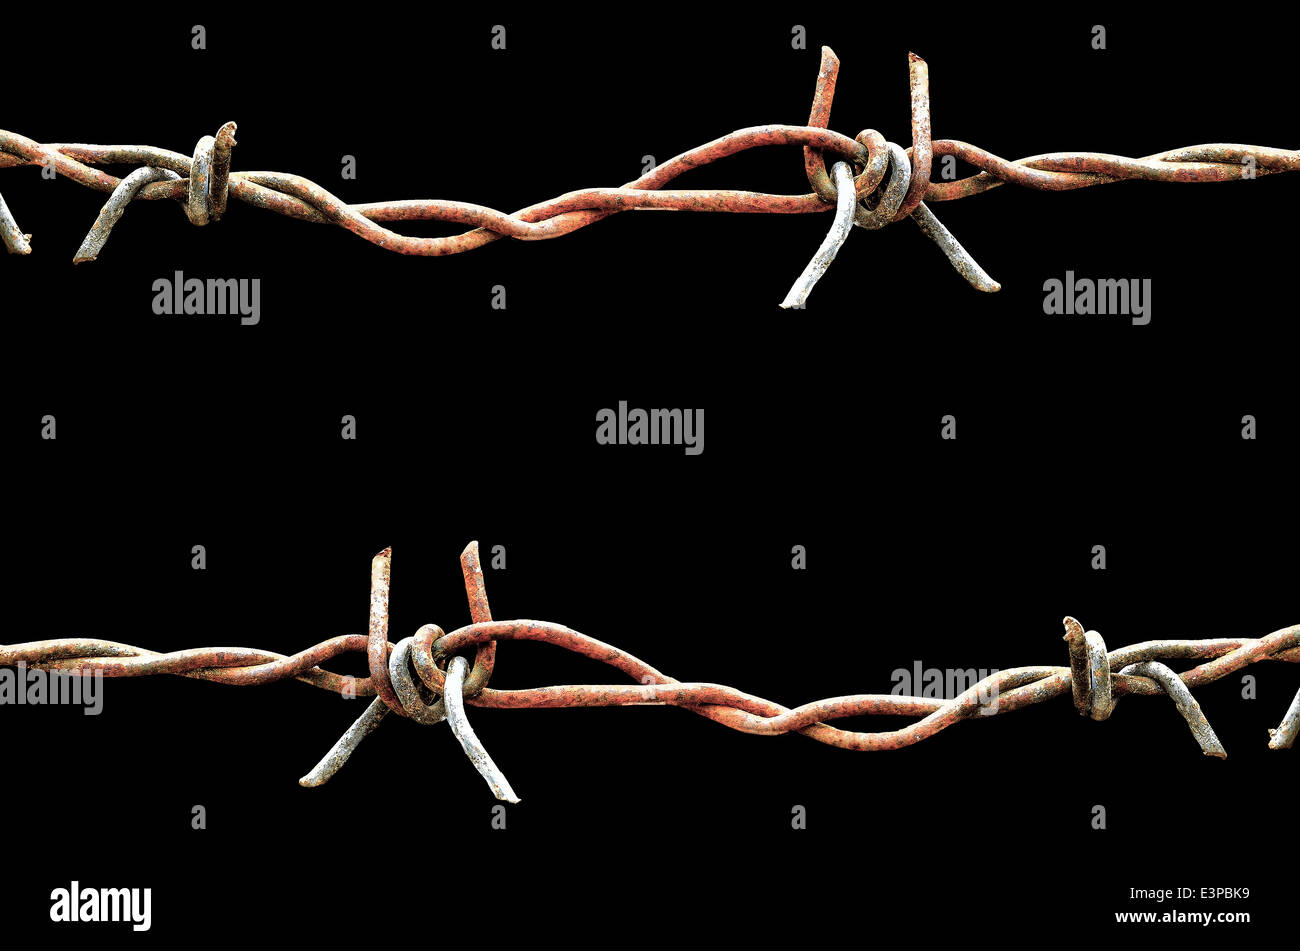 Rusty barbed wire on black background Stock Photo